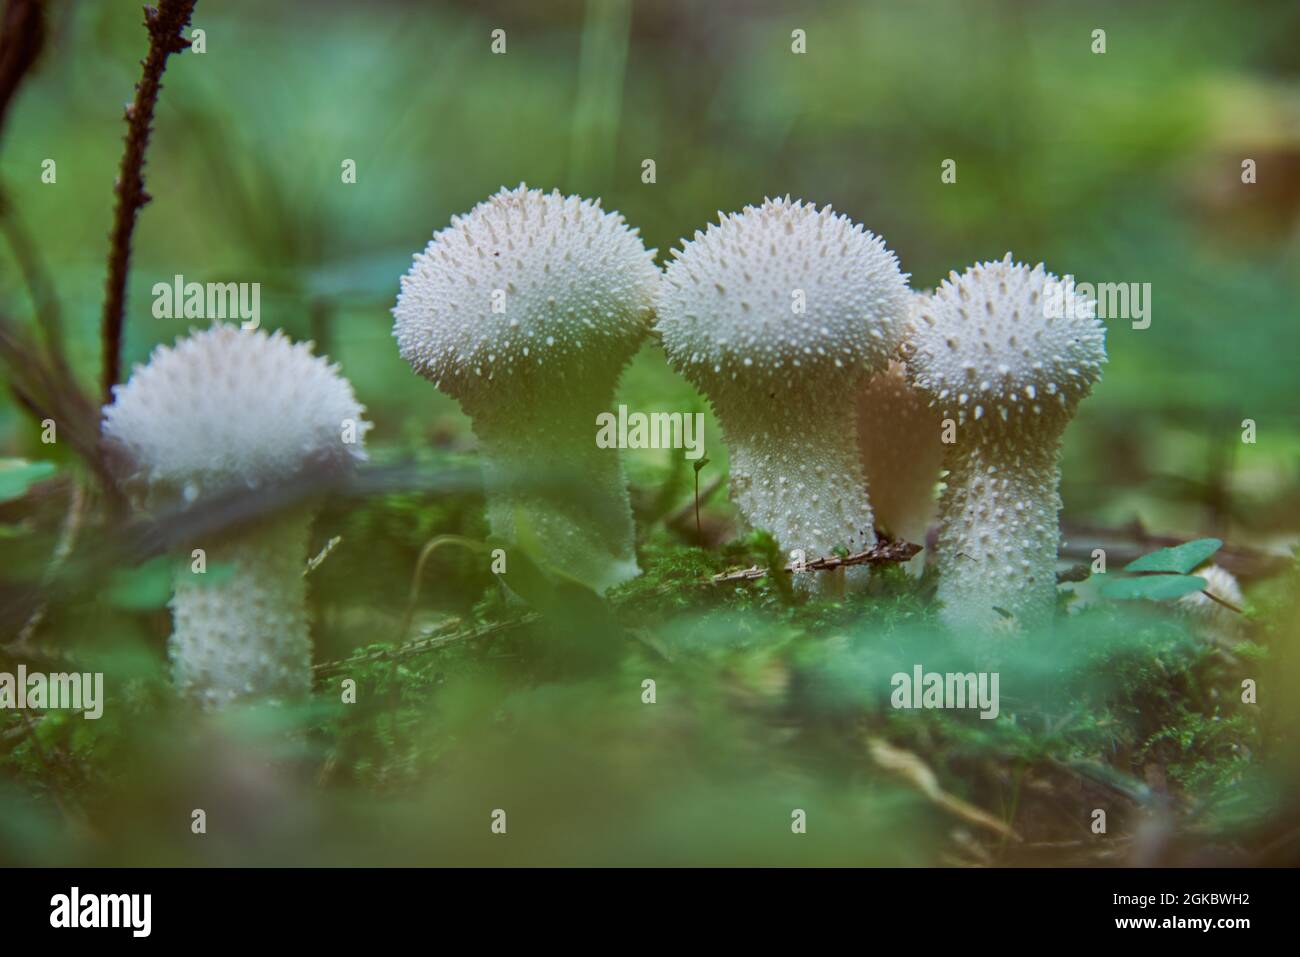 Four white spiny raincoat mushrooms grow in the grass in the autumn forest. Abstract background, picking mushrooms. Stock Photo